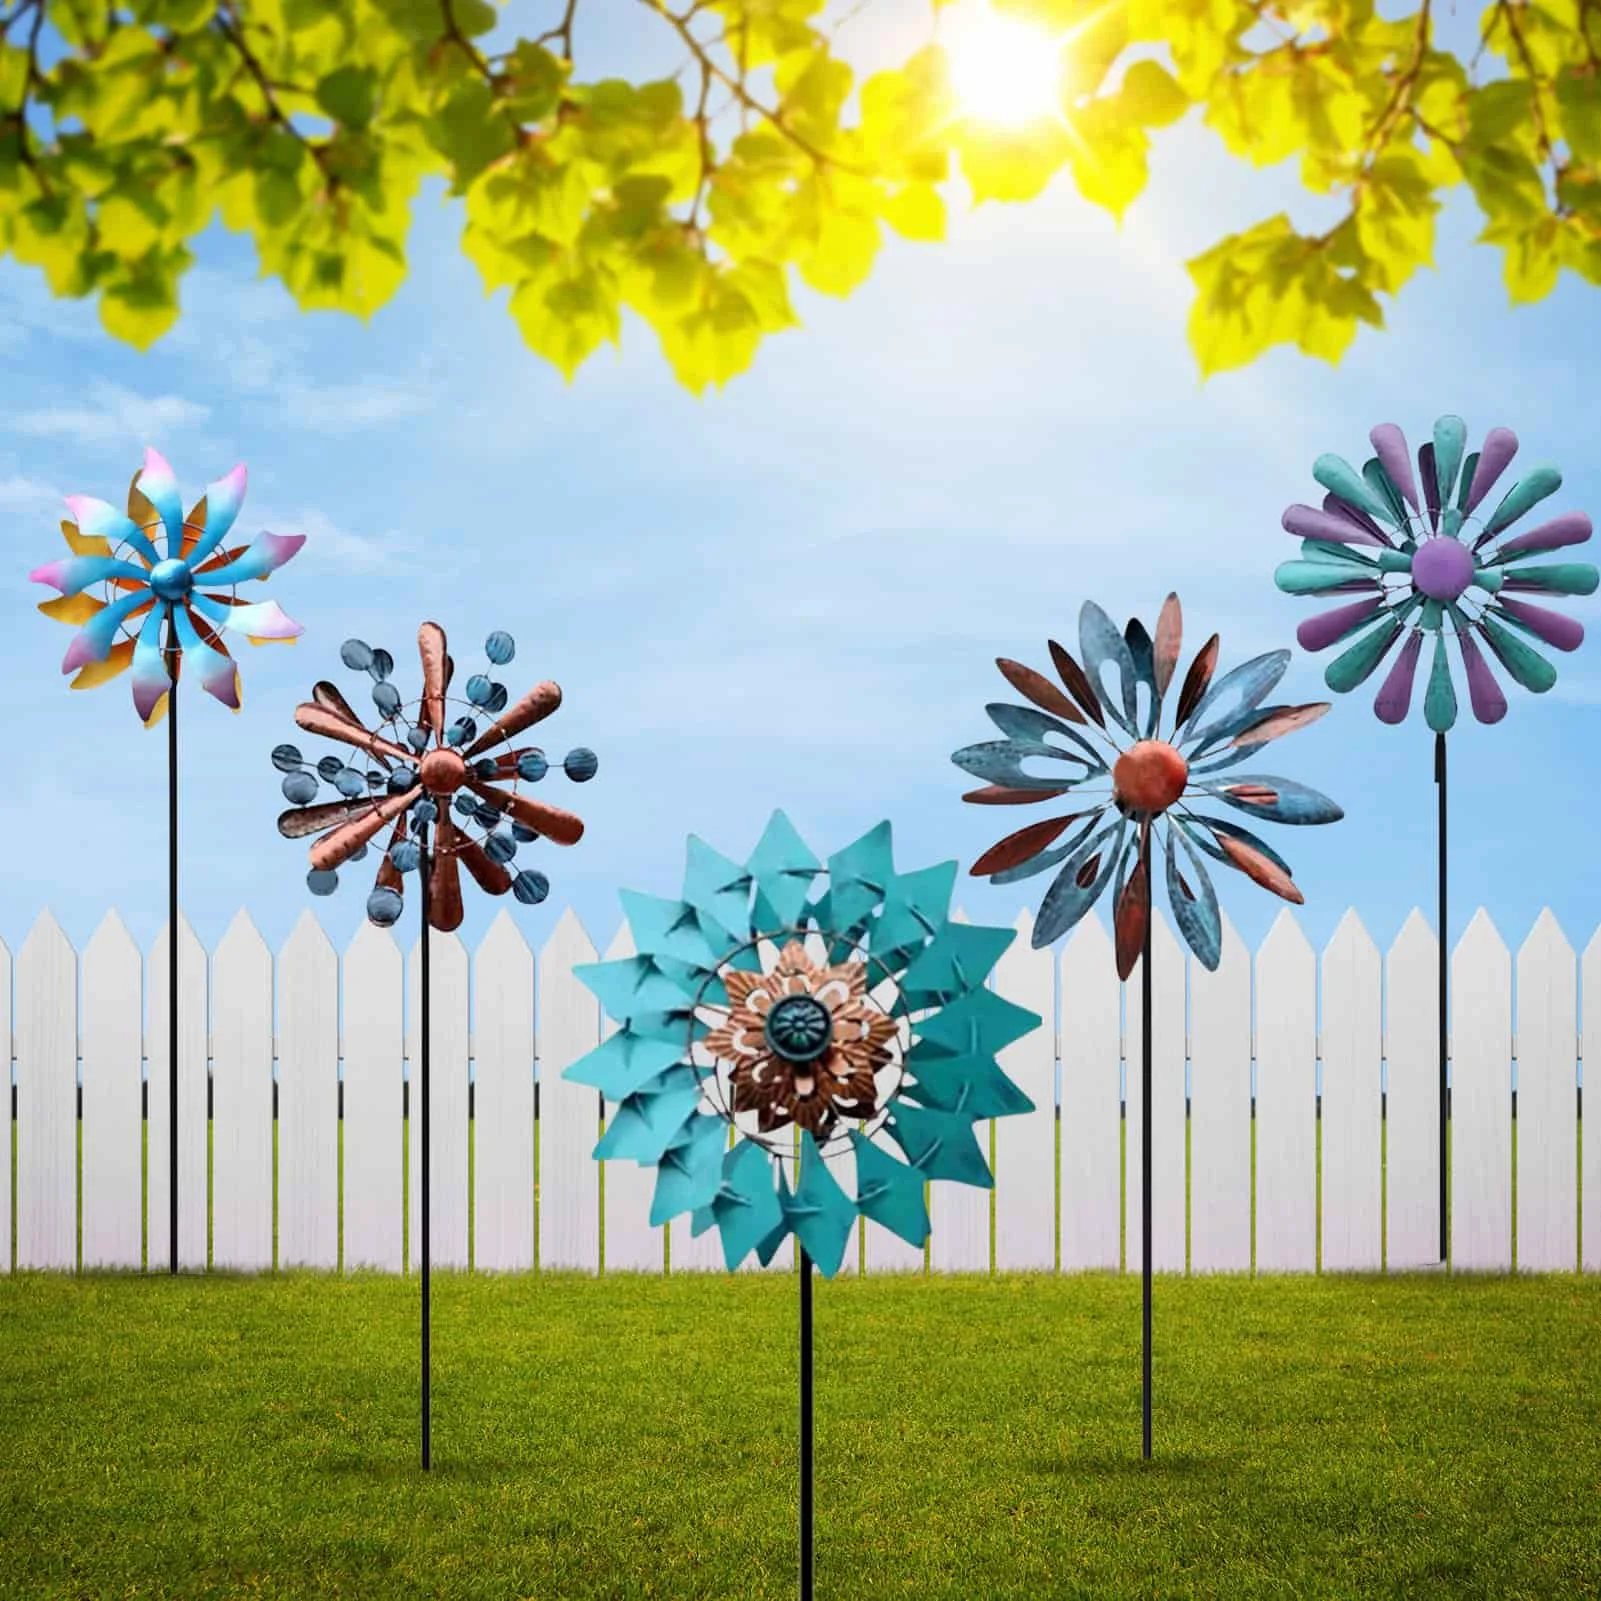 DIBIEECN Kinetic Wind Spinner with Garden Stake Metal Windmill-Kinetic Garden Decoration 360 Swivel Peacock Outdoor Wind Sculpture Spinners 63 Inch Dual Direction Wind Catcher for Yard Idea 